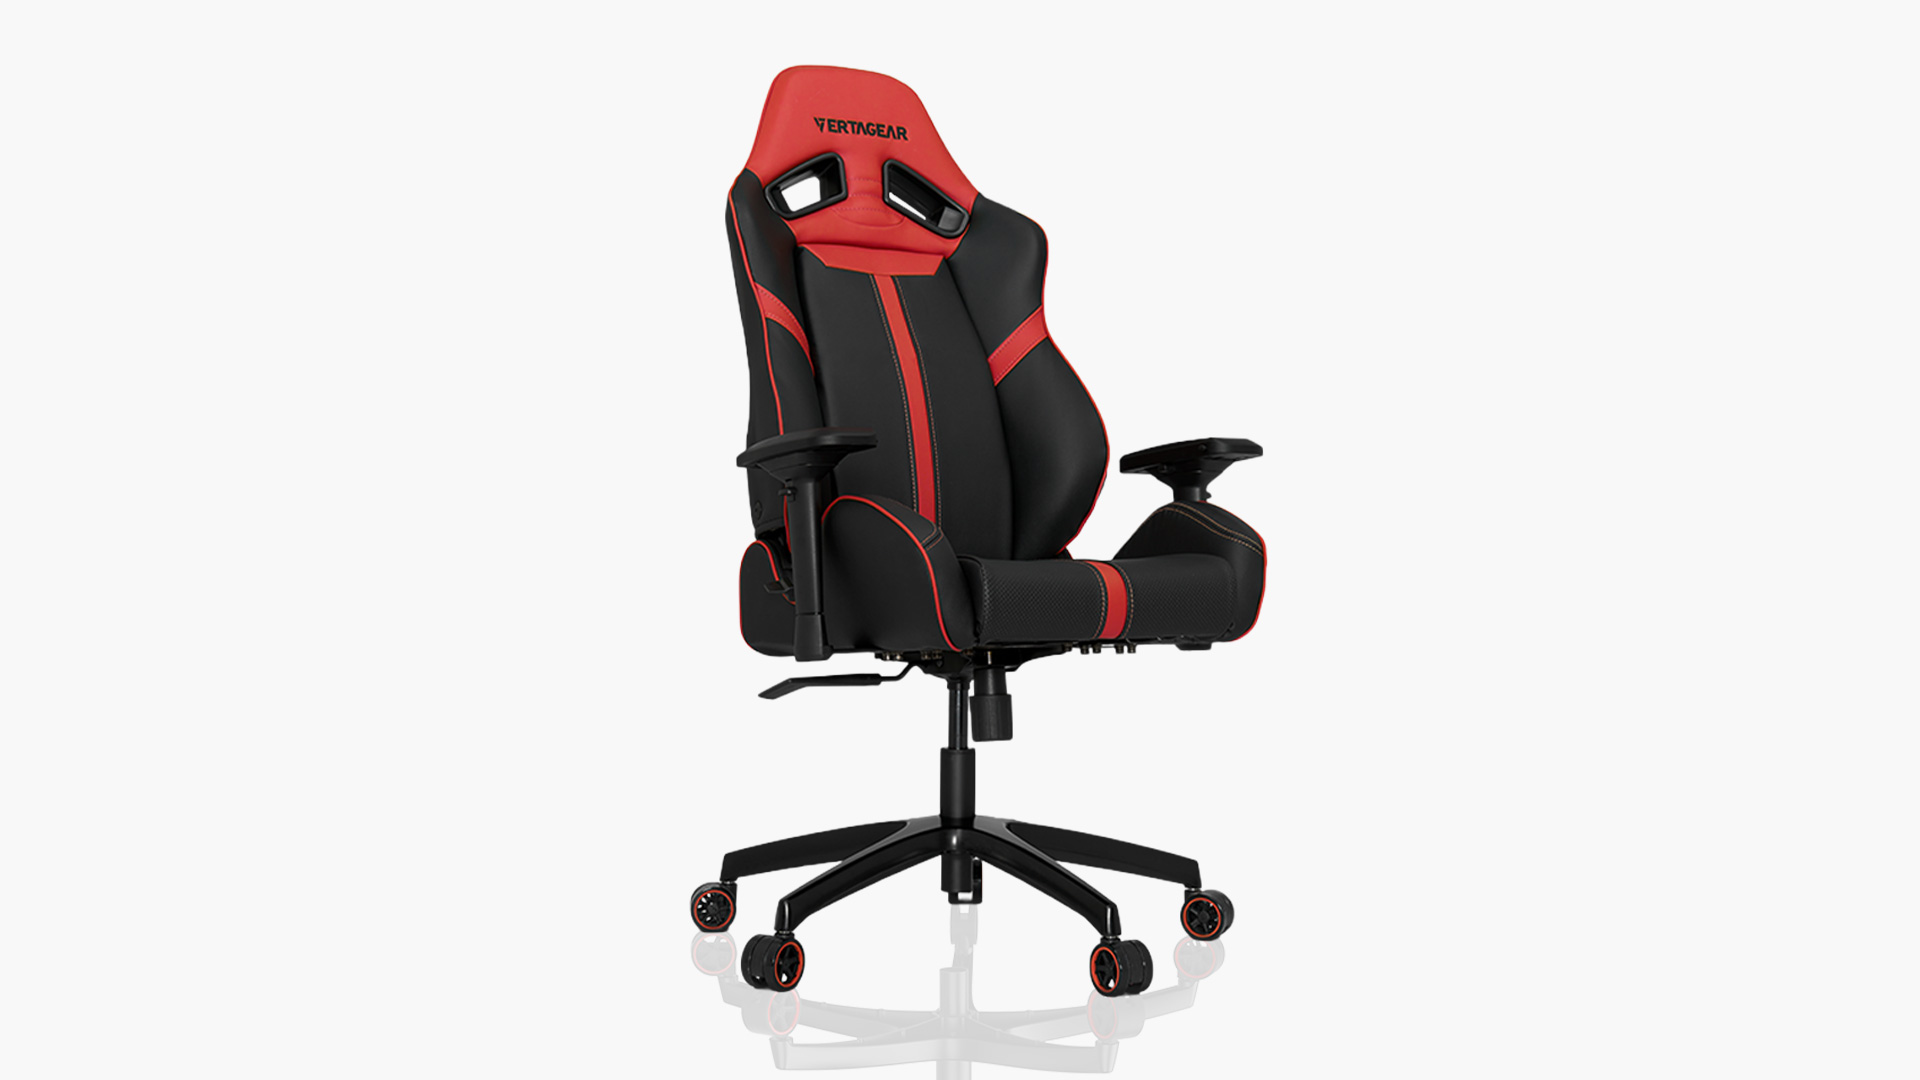 https://cdn.autonomous.ai/static/upload/images/product/gaming-chair-sl5000-by-vertagear0-1551-1637290585568.jpg